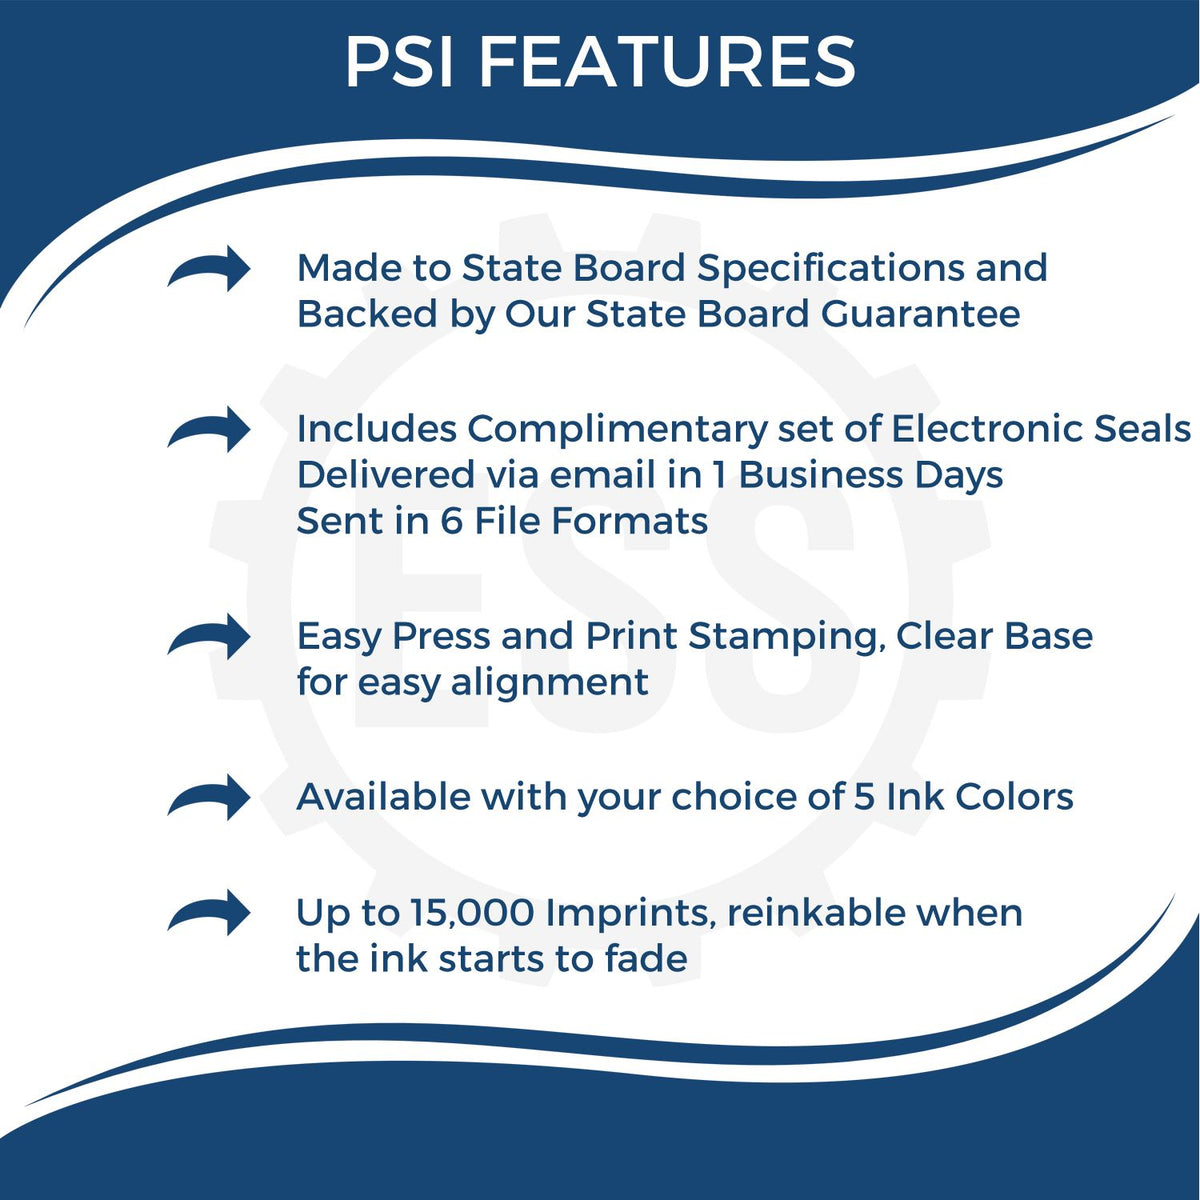 A picture of an infographic highlighting the selling points for the PSI New Jersey Notary Stamp